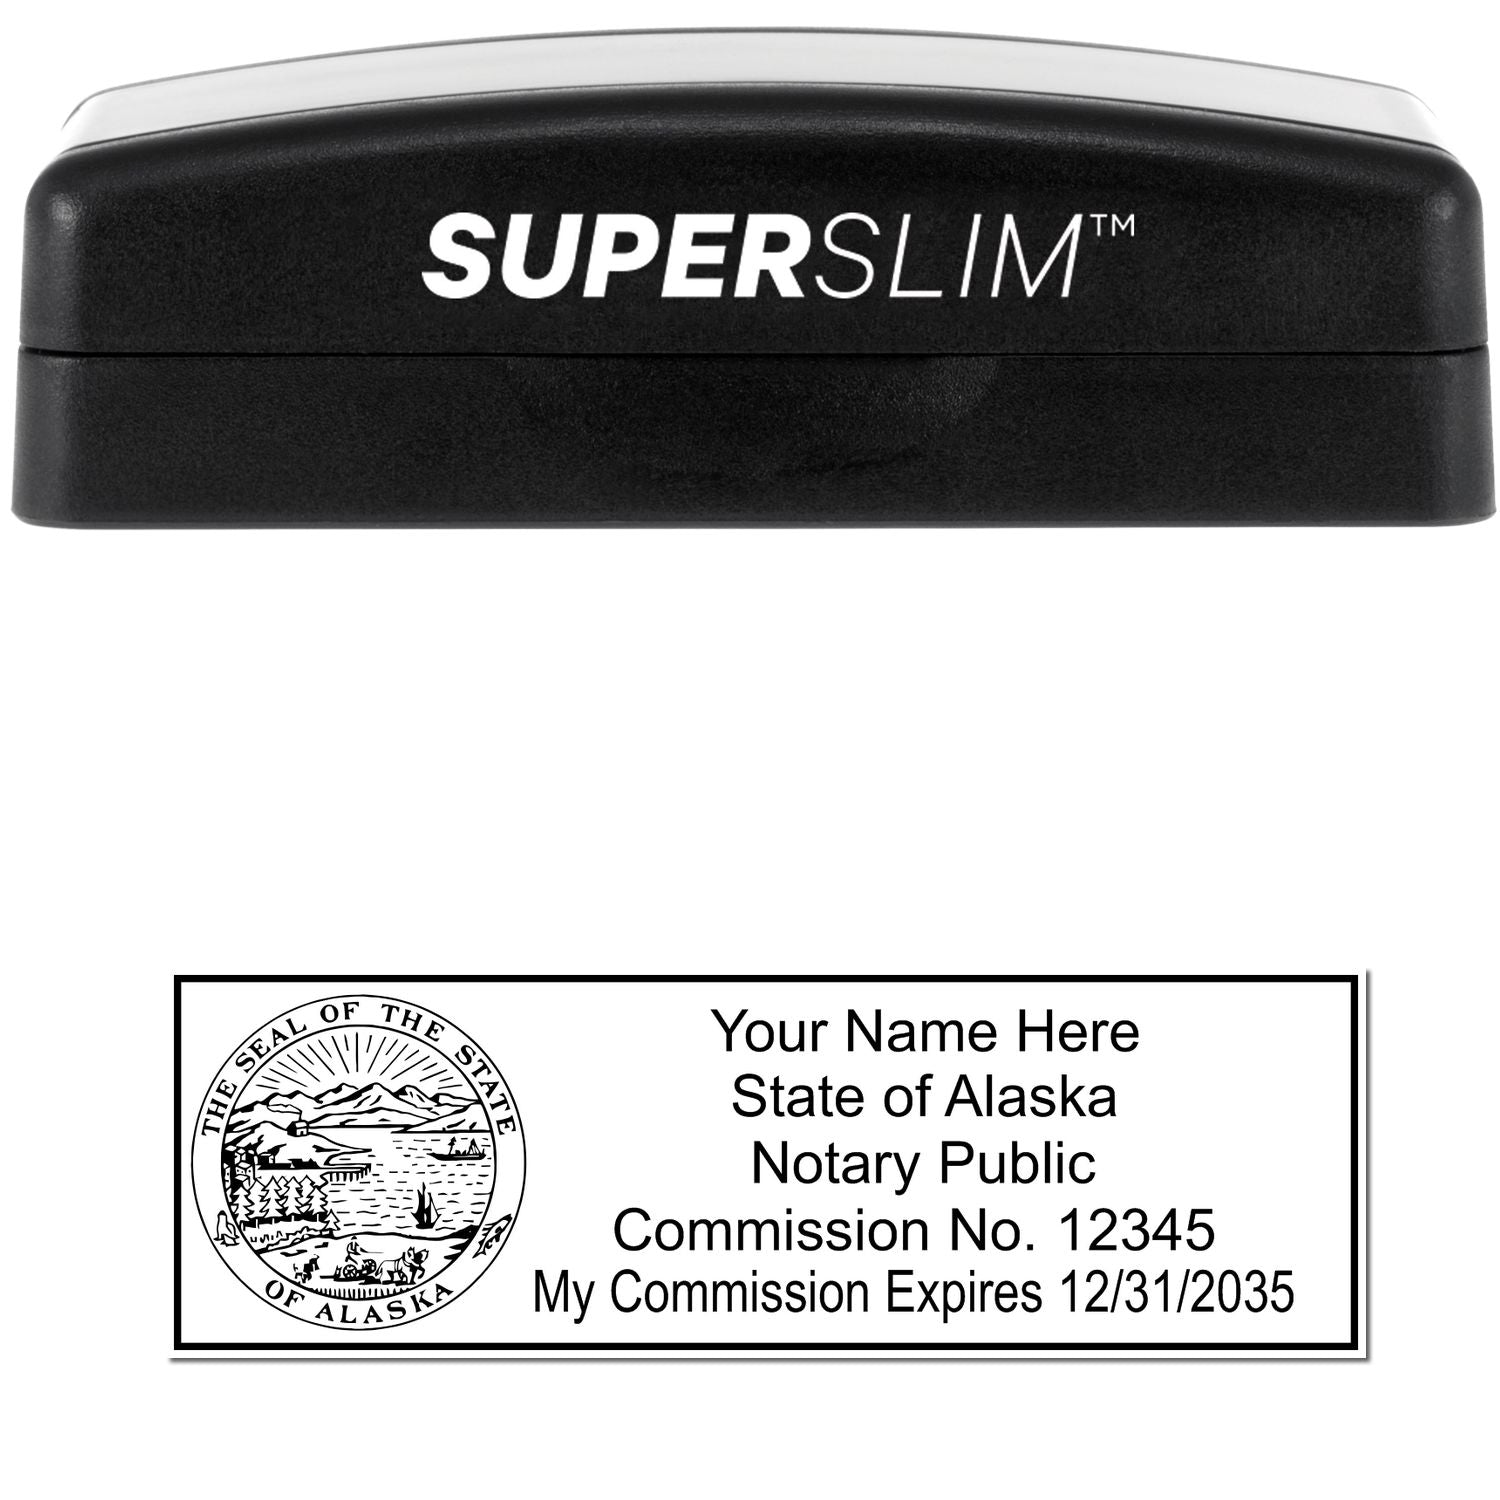 The main image for the Super Slim Alaska Notary Public Stamp depicting a sample of the imprint and electronic files